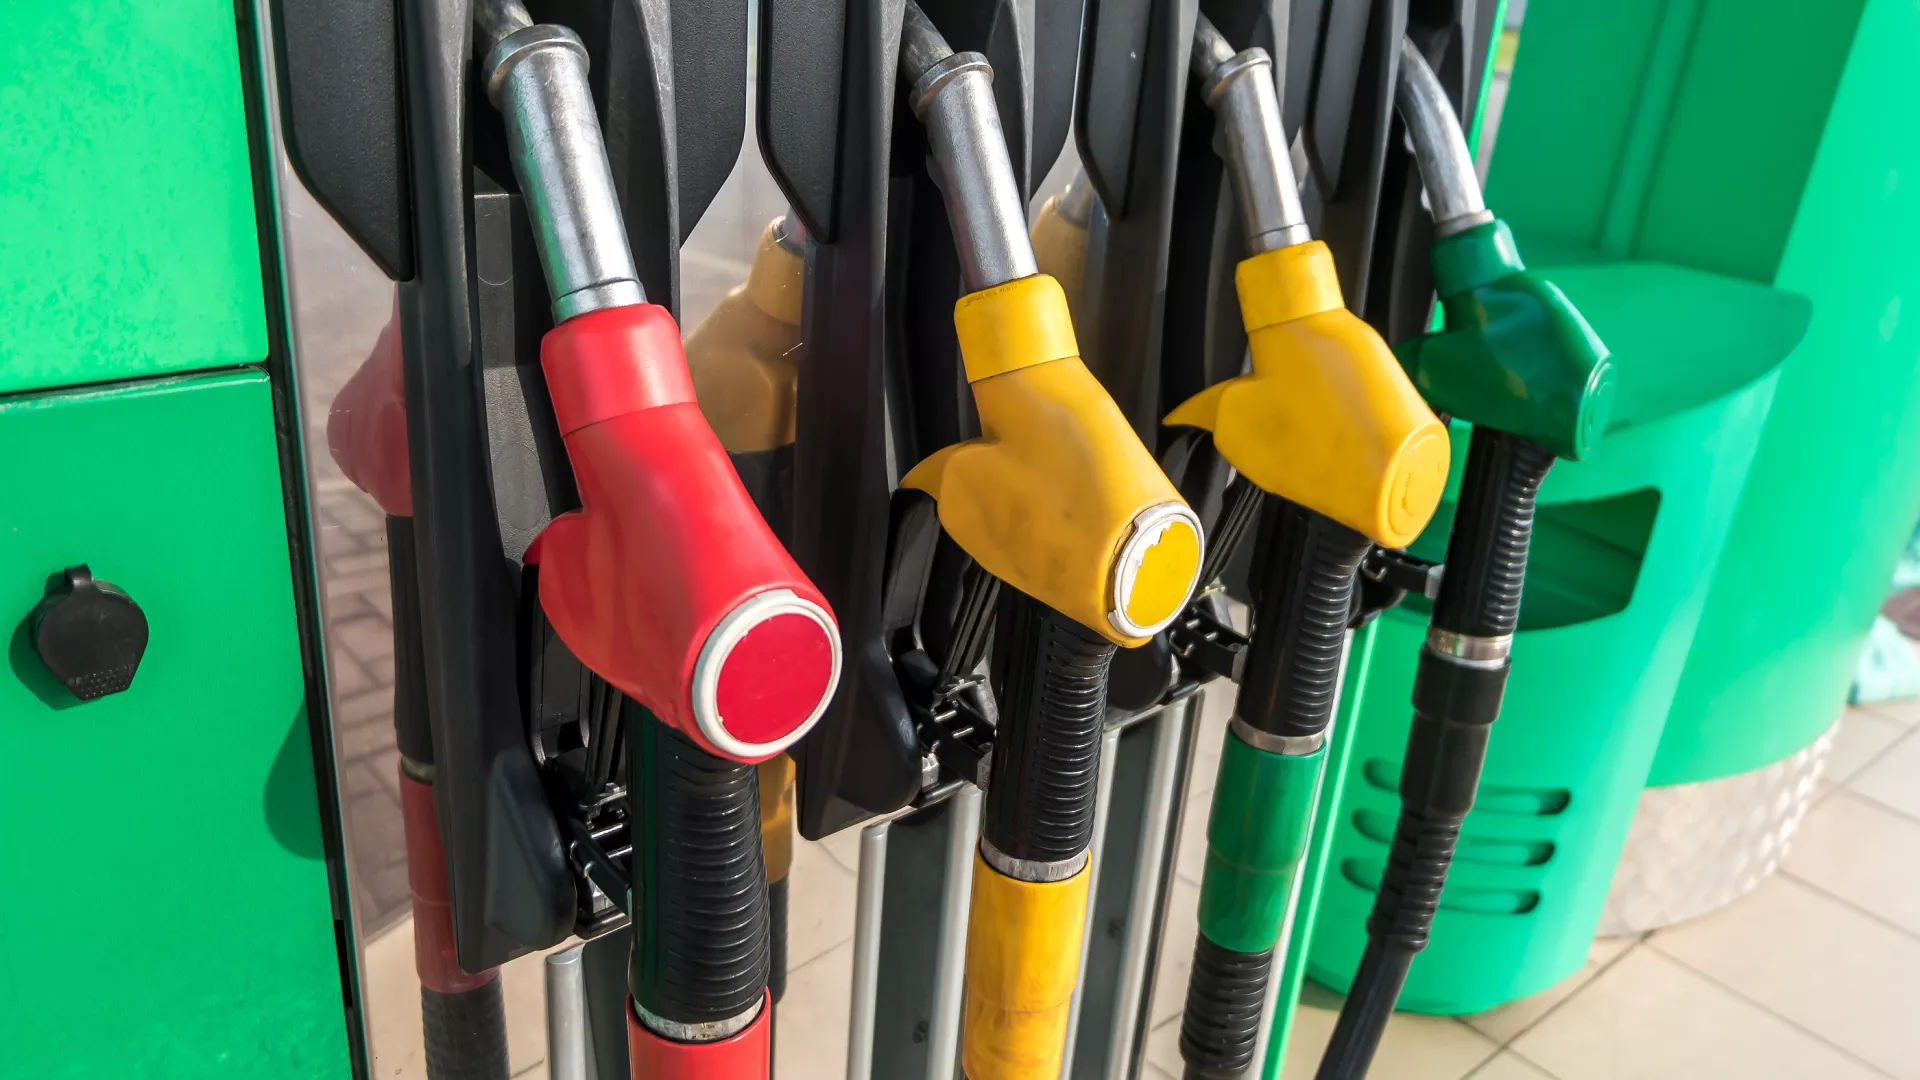 A row of brightly colored gasoline pump nozzles inserted into a gas pump